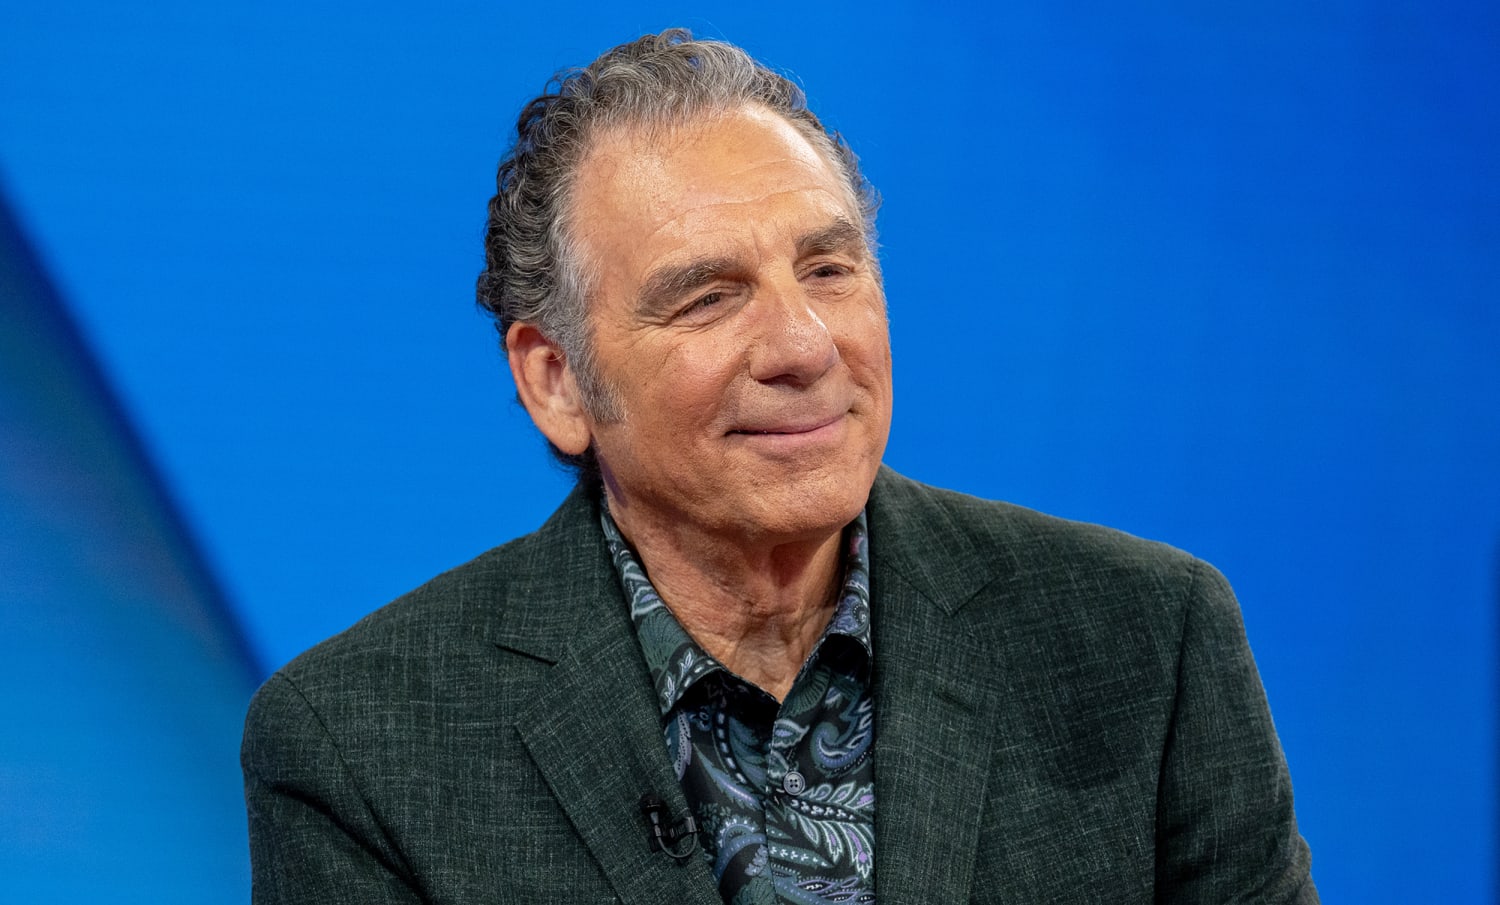 Michael Richards reveals his son's favorite 'Seinfeld' character ... and it's not Kramer